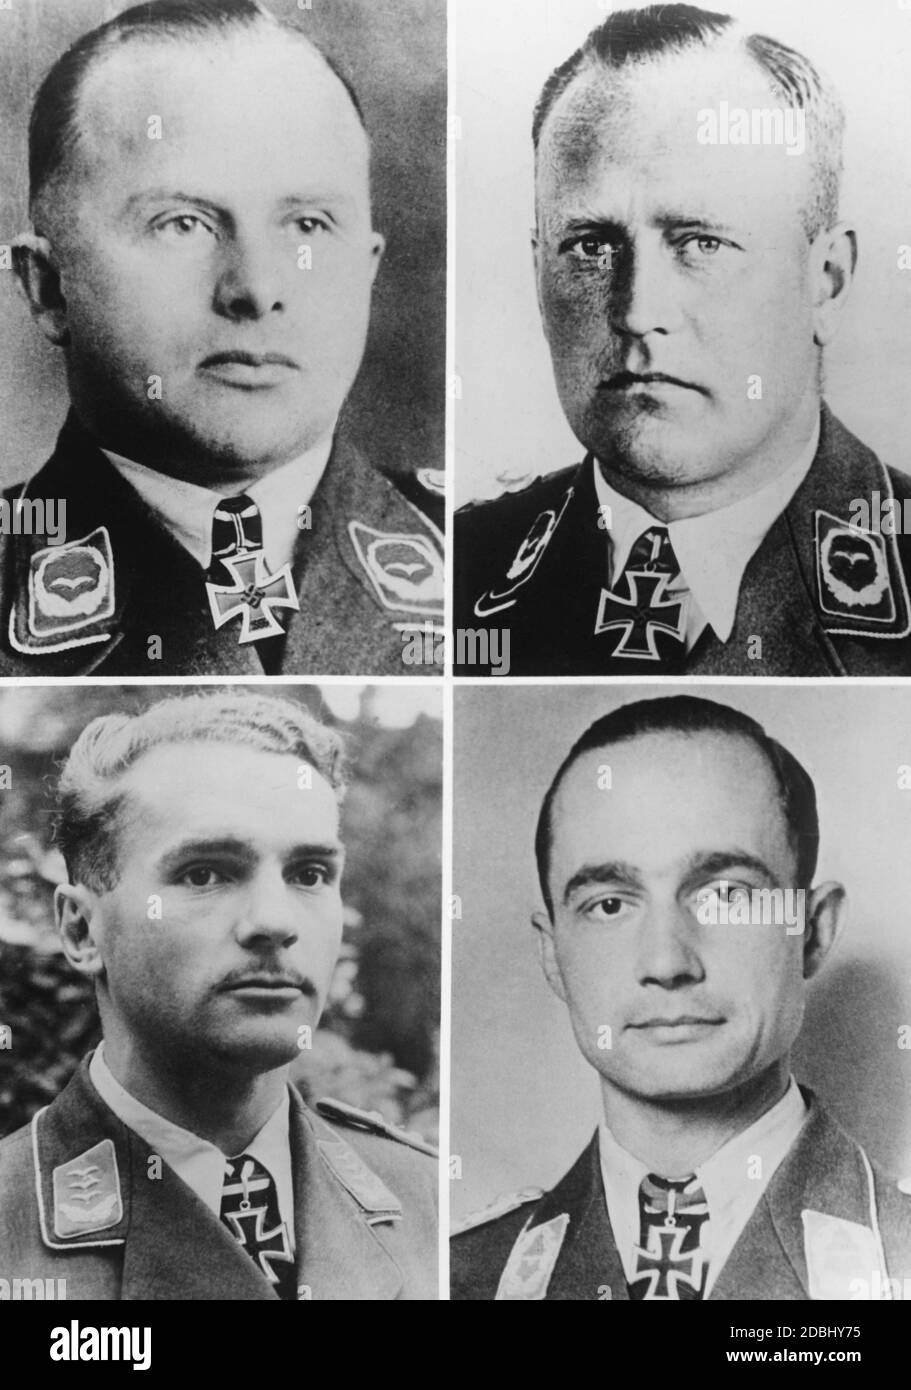 From left to right: Major Joachim Hahn, Kampfgruppe 606, Major Edgar Petersen, I./KG 40, Captain Walter Storp, II./KG 76 and Major Friedrich Kless, II./KG 55, with the Knight's Cross. The date indicates the date of awarding. Stock Photo